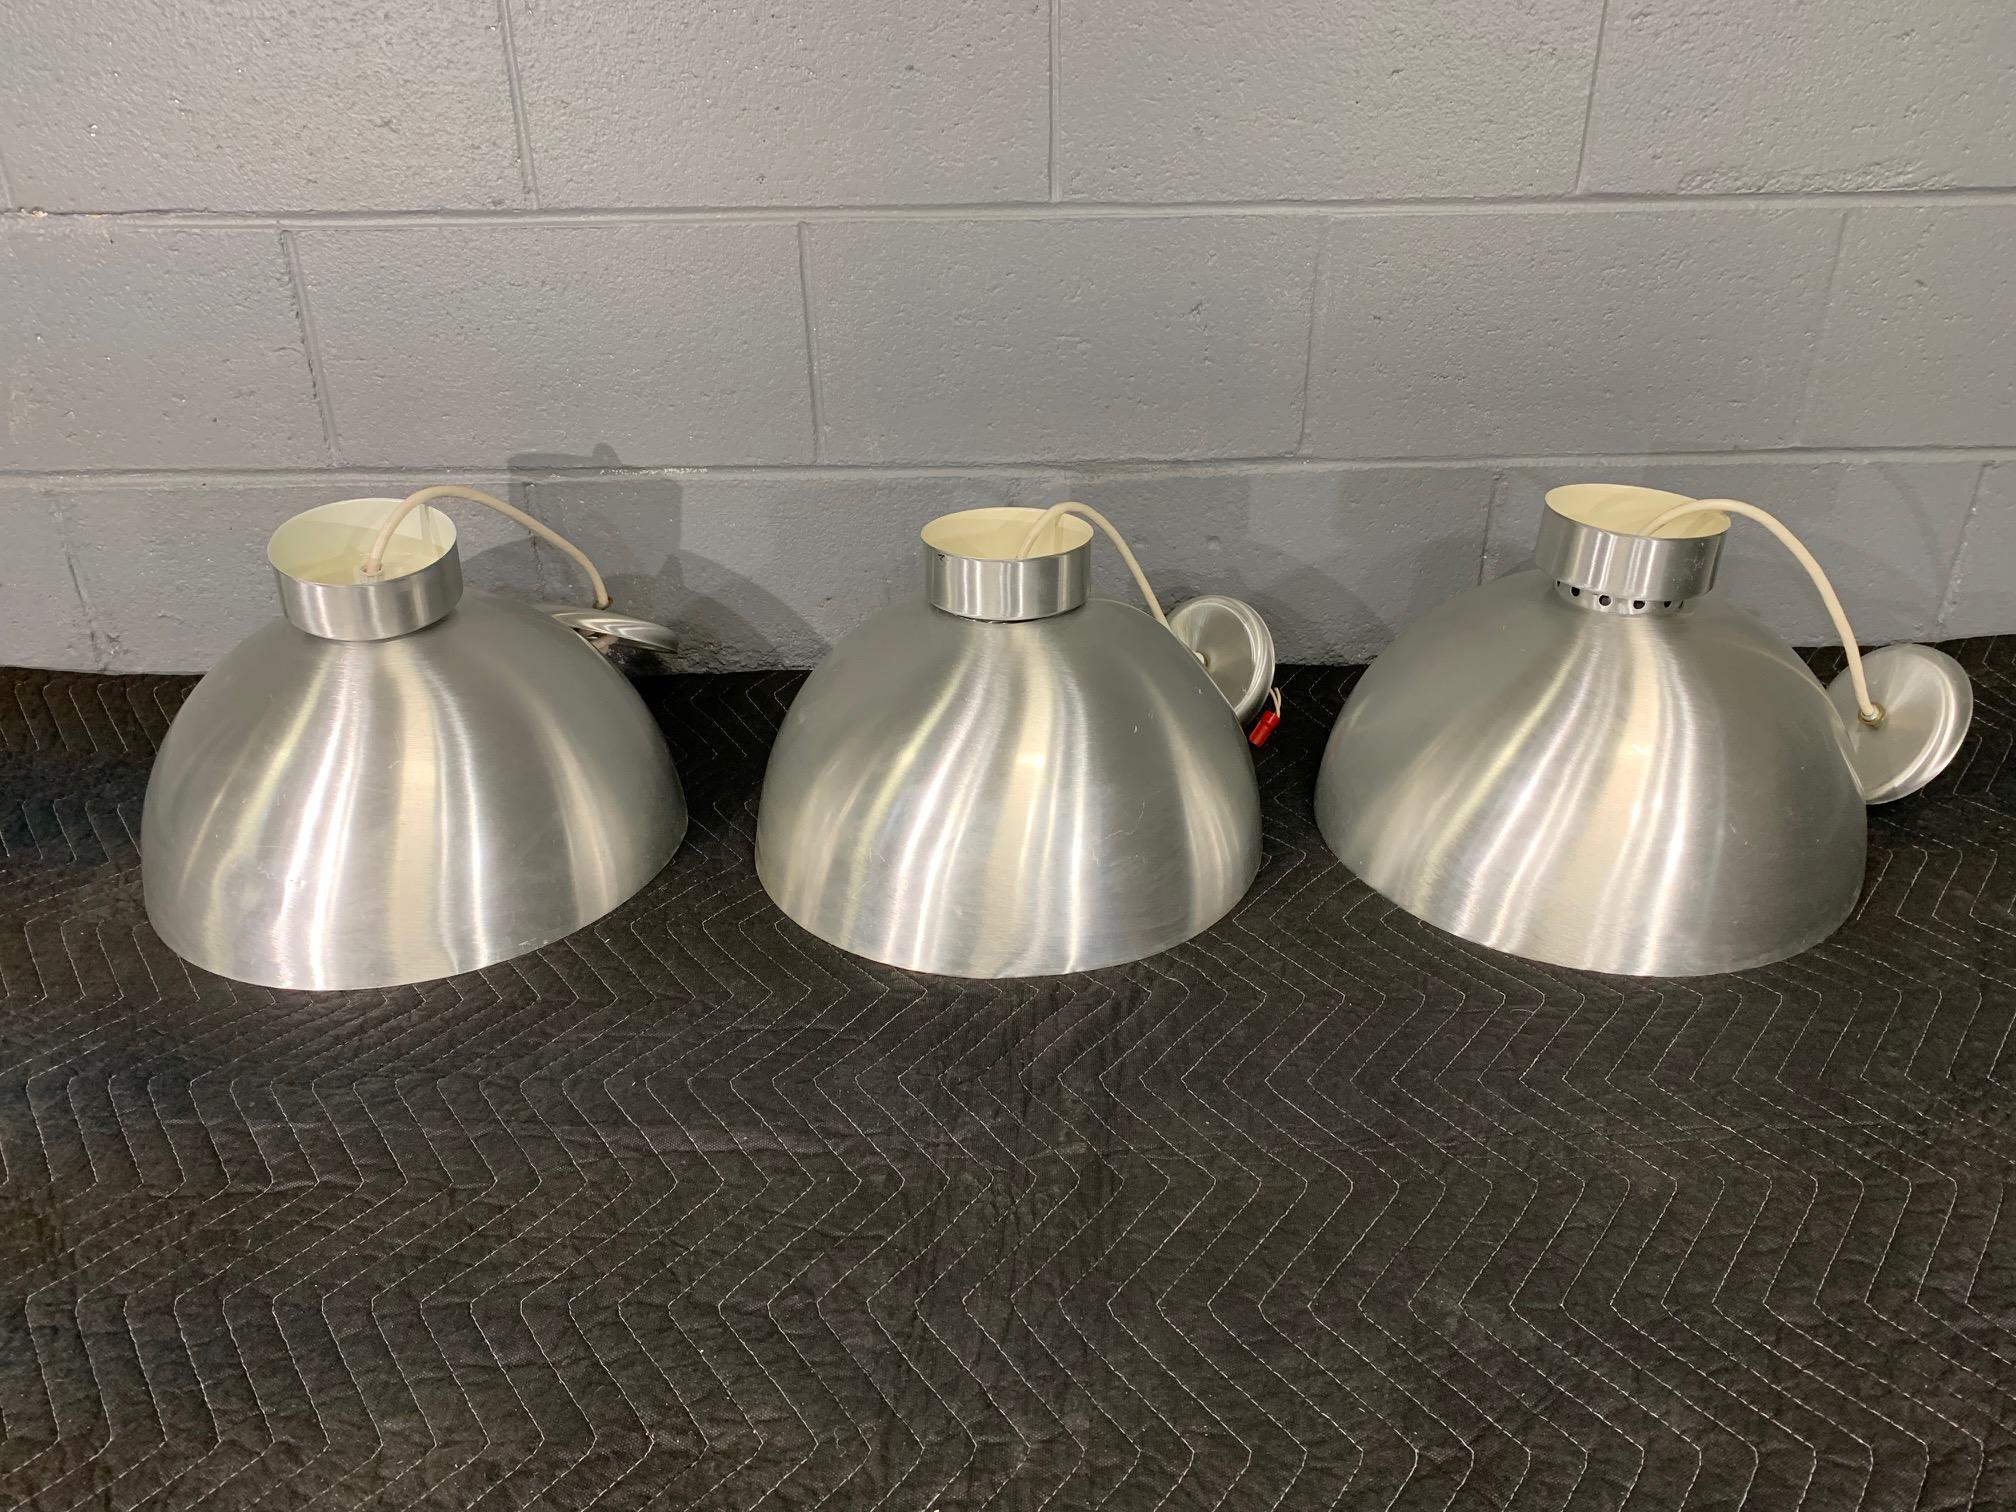 Three spun aluminum midcentury style round hanging lights. Would be a superb addition to any Mid-Century Modern decor.